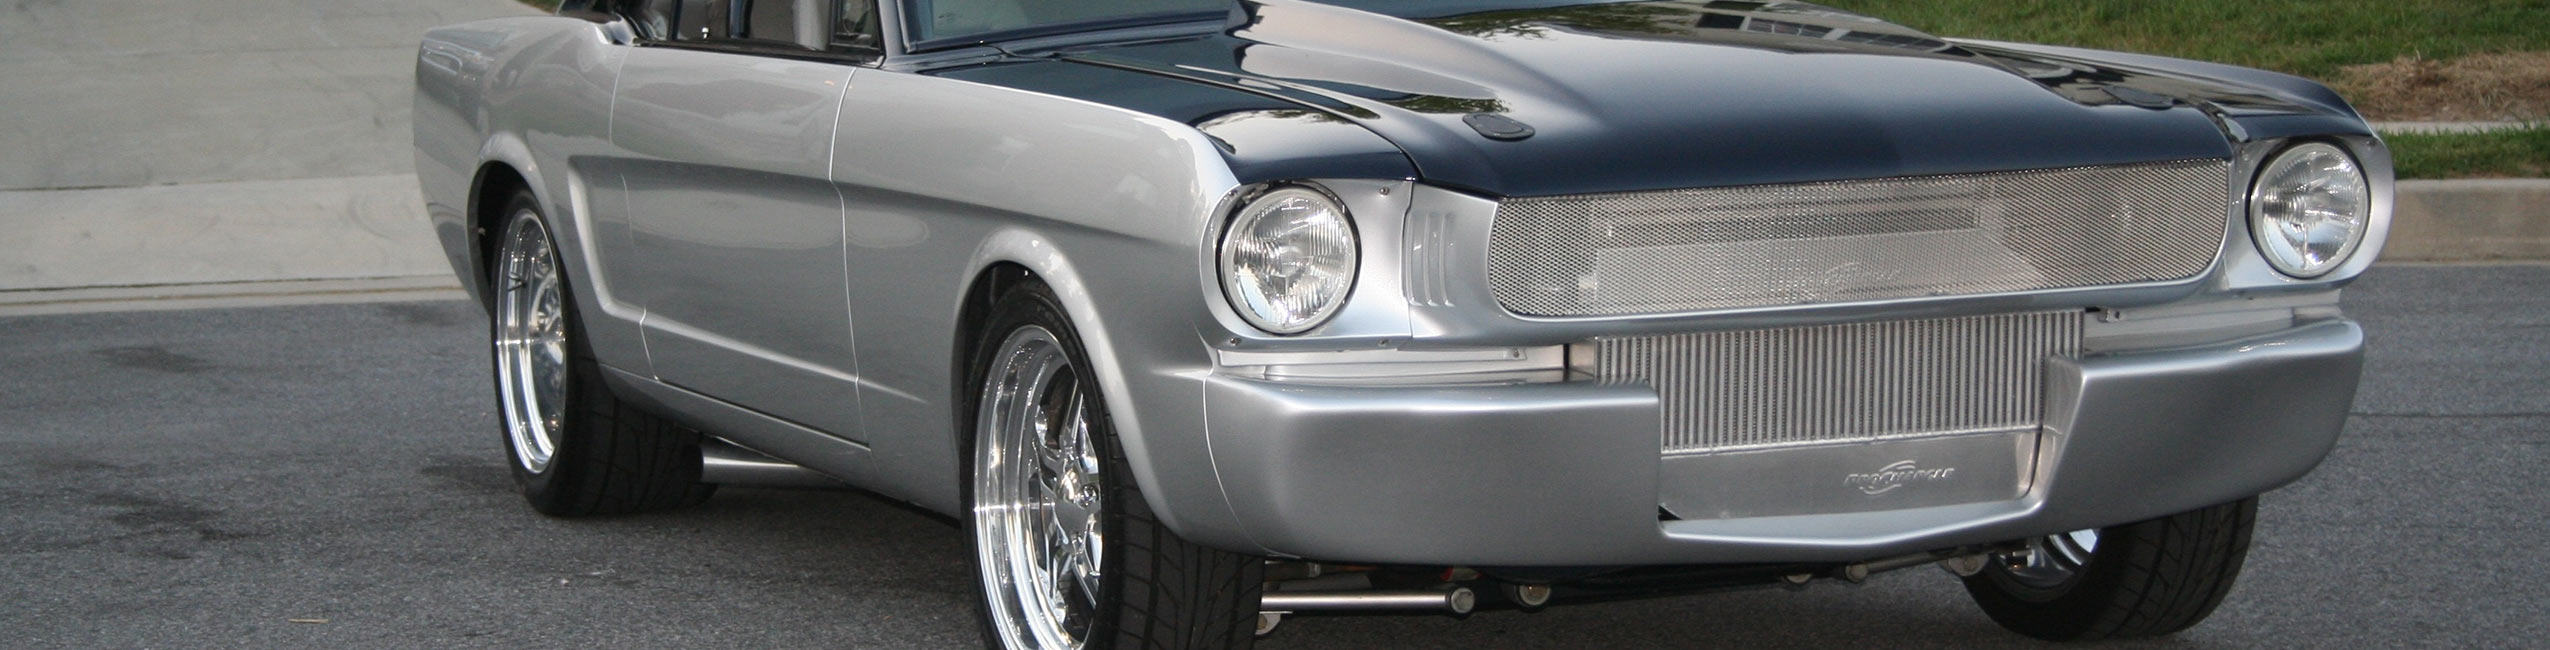 1965 Ford Mustang Carborated